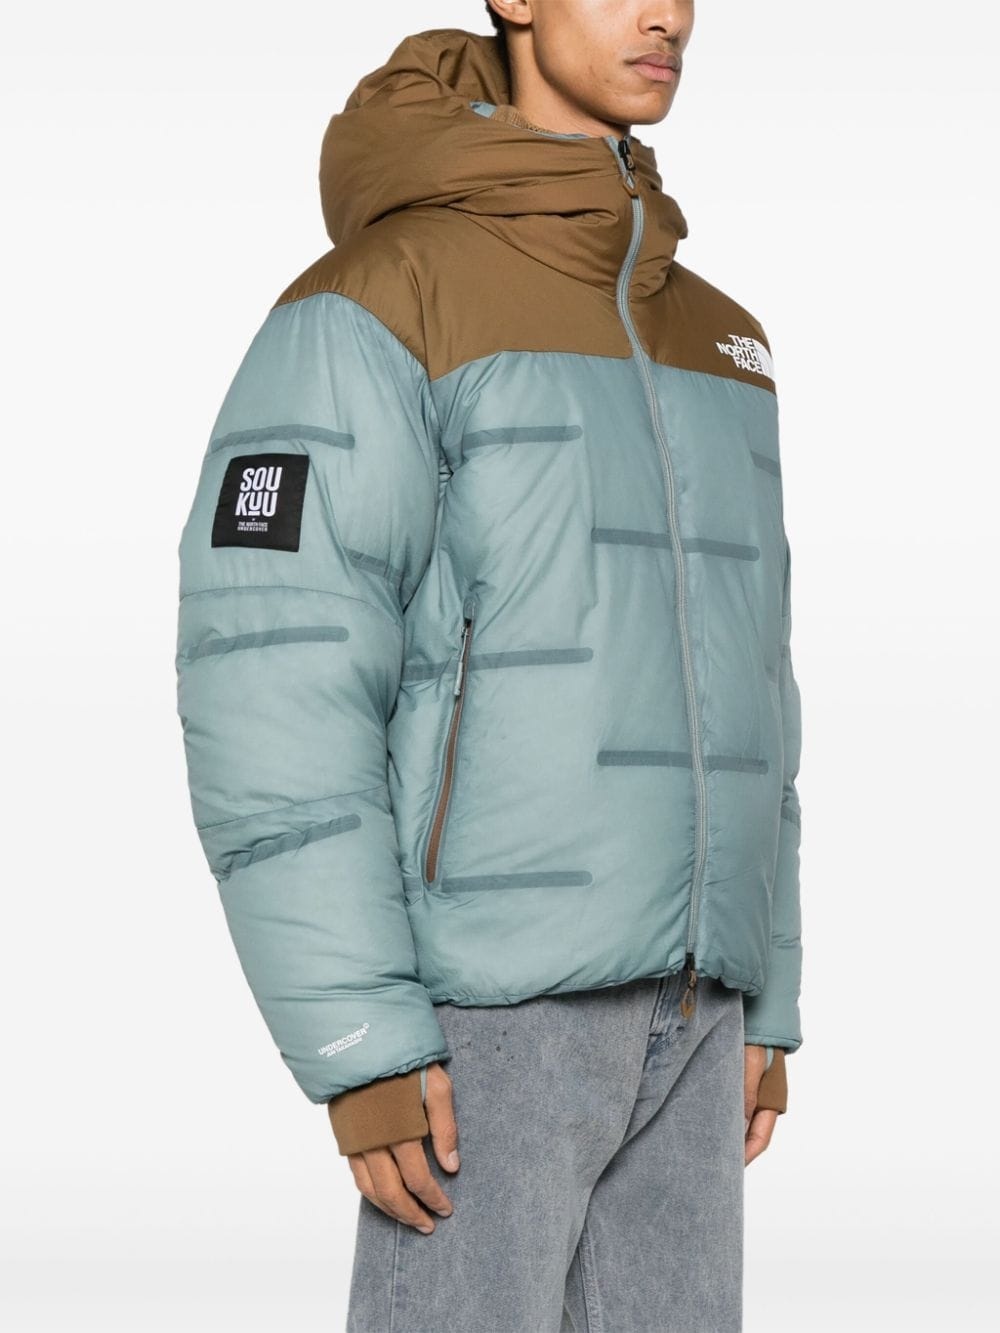 Undercover x The North Face Cloud Down Nuptse Jacket (NF0A84S2WI7) - 4